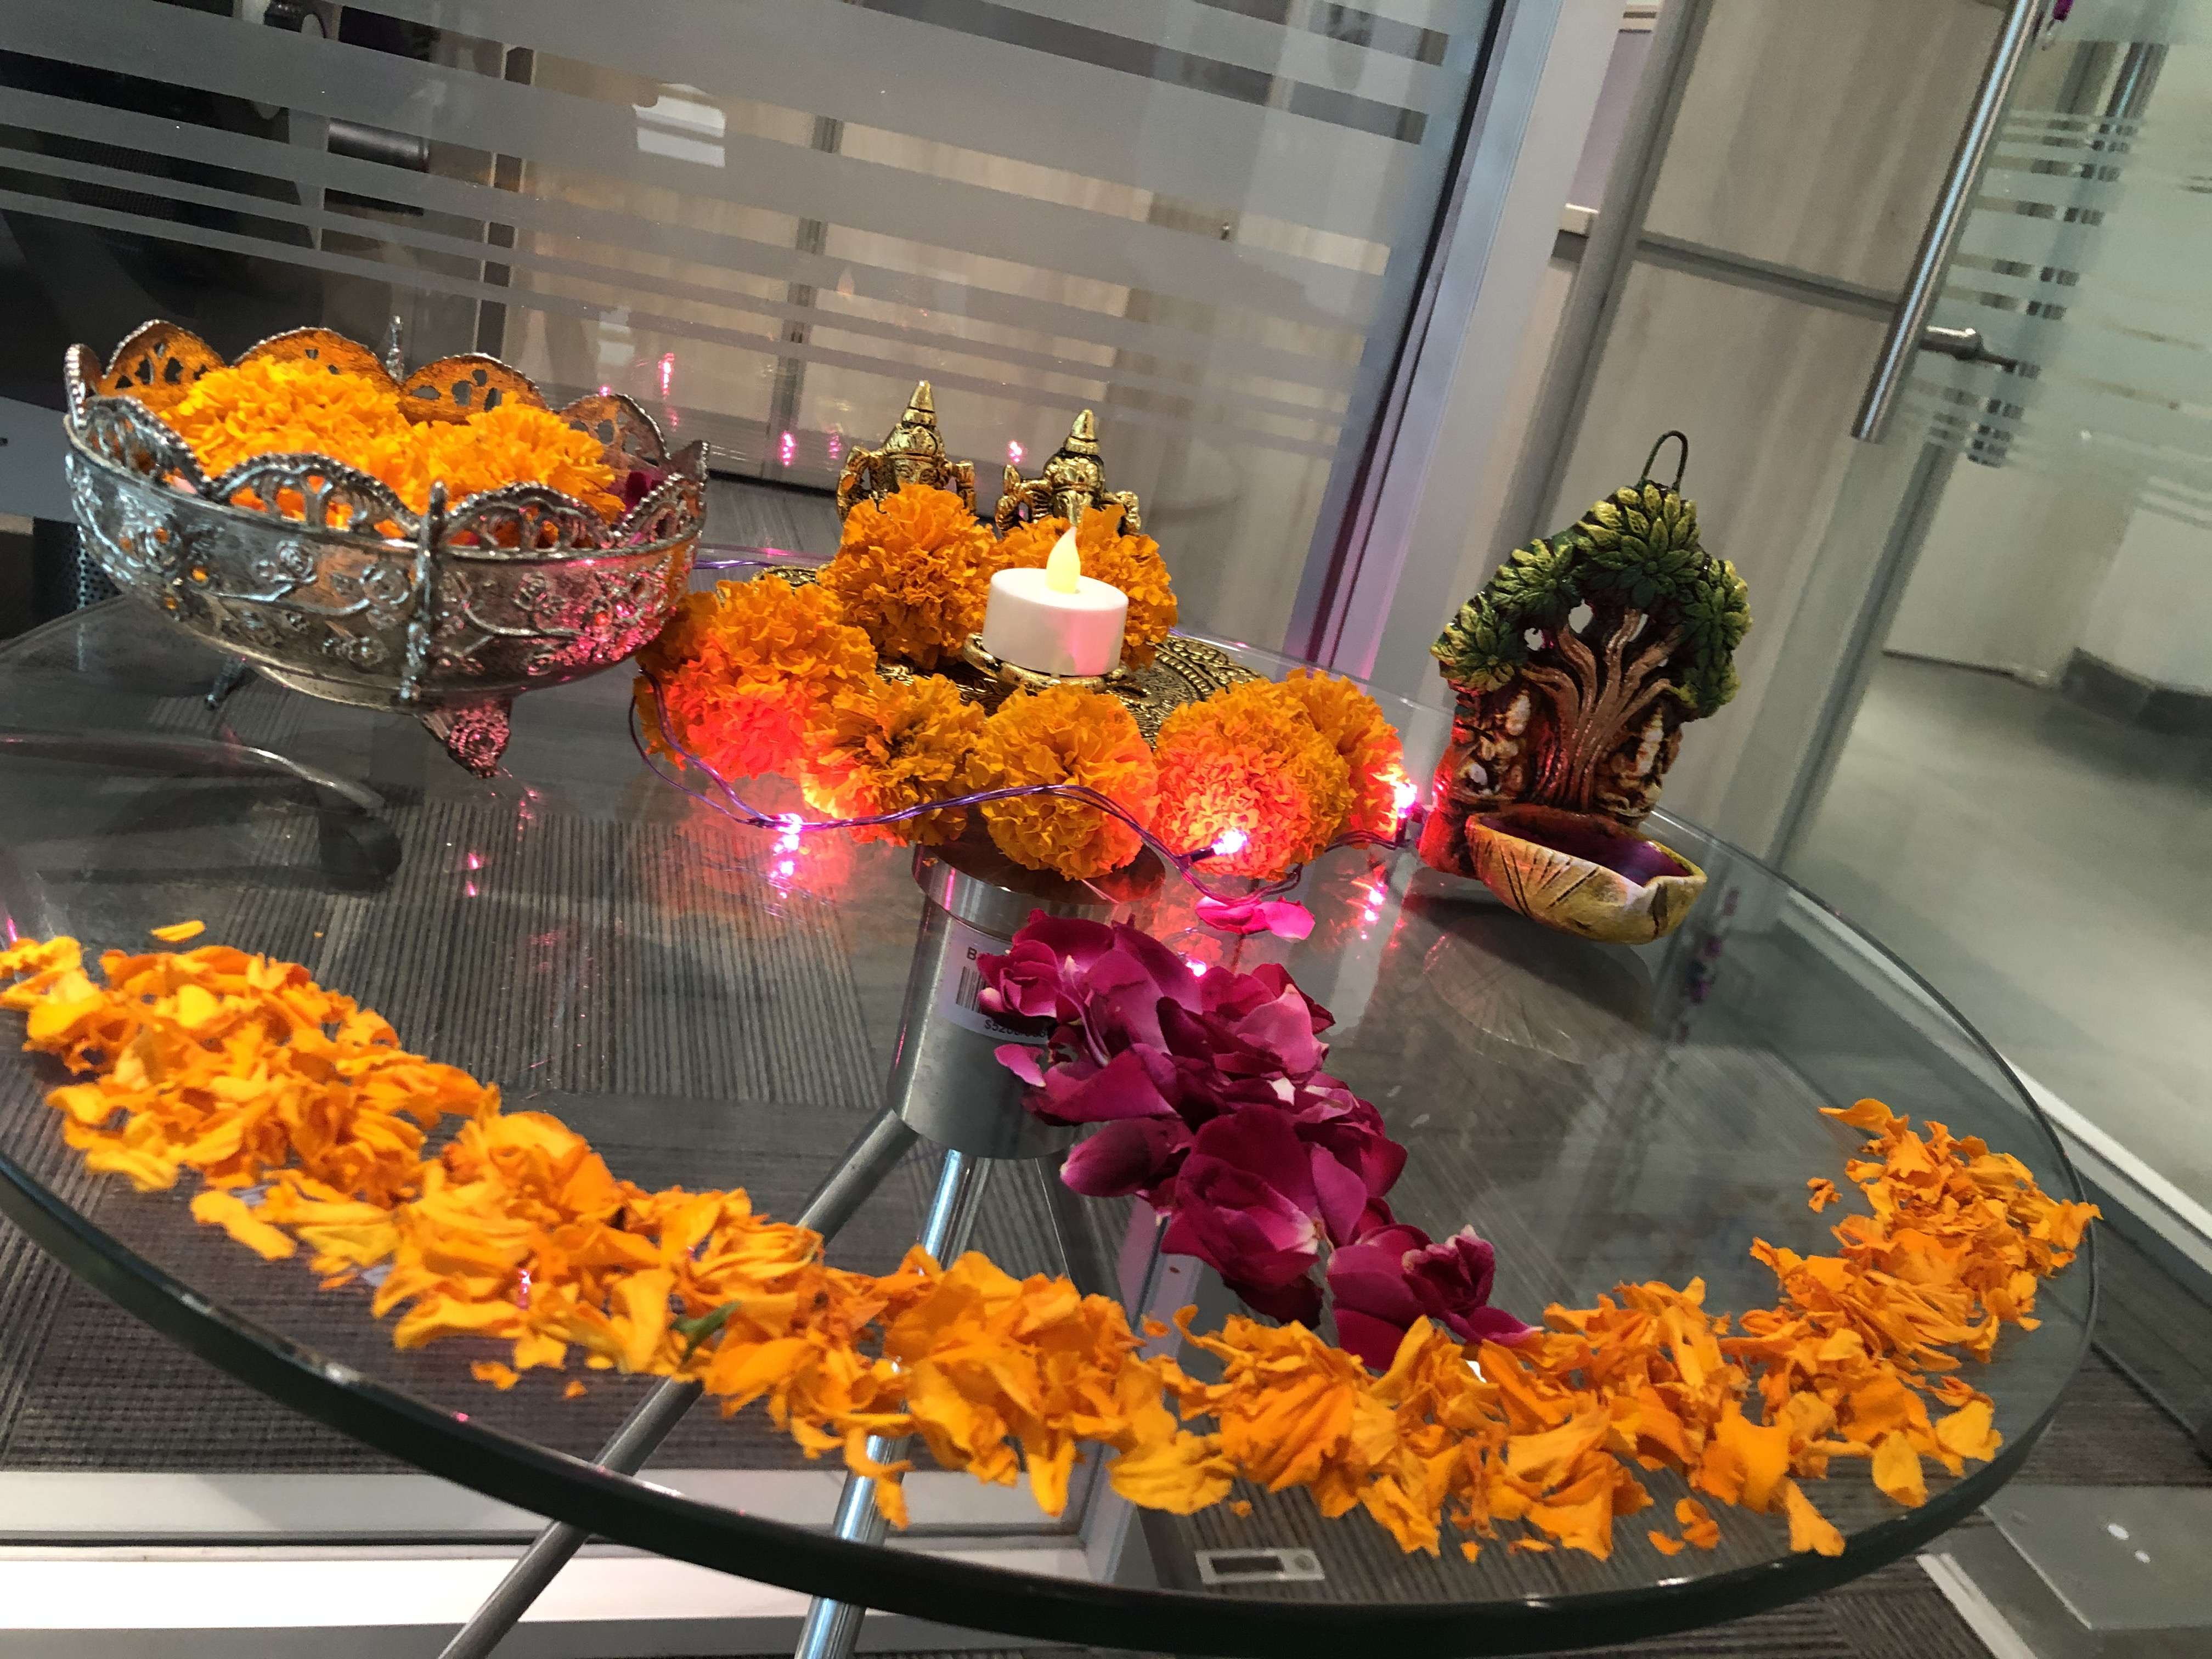 Diwali Celebrations: Food and festivities lit up campus